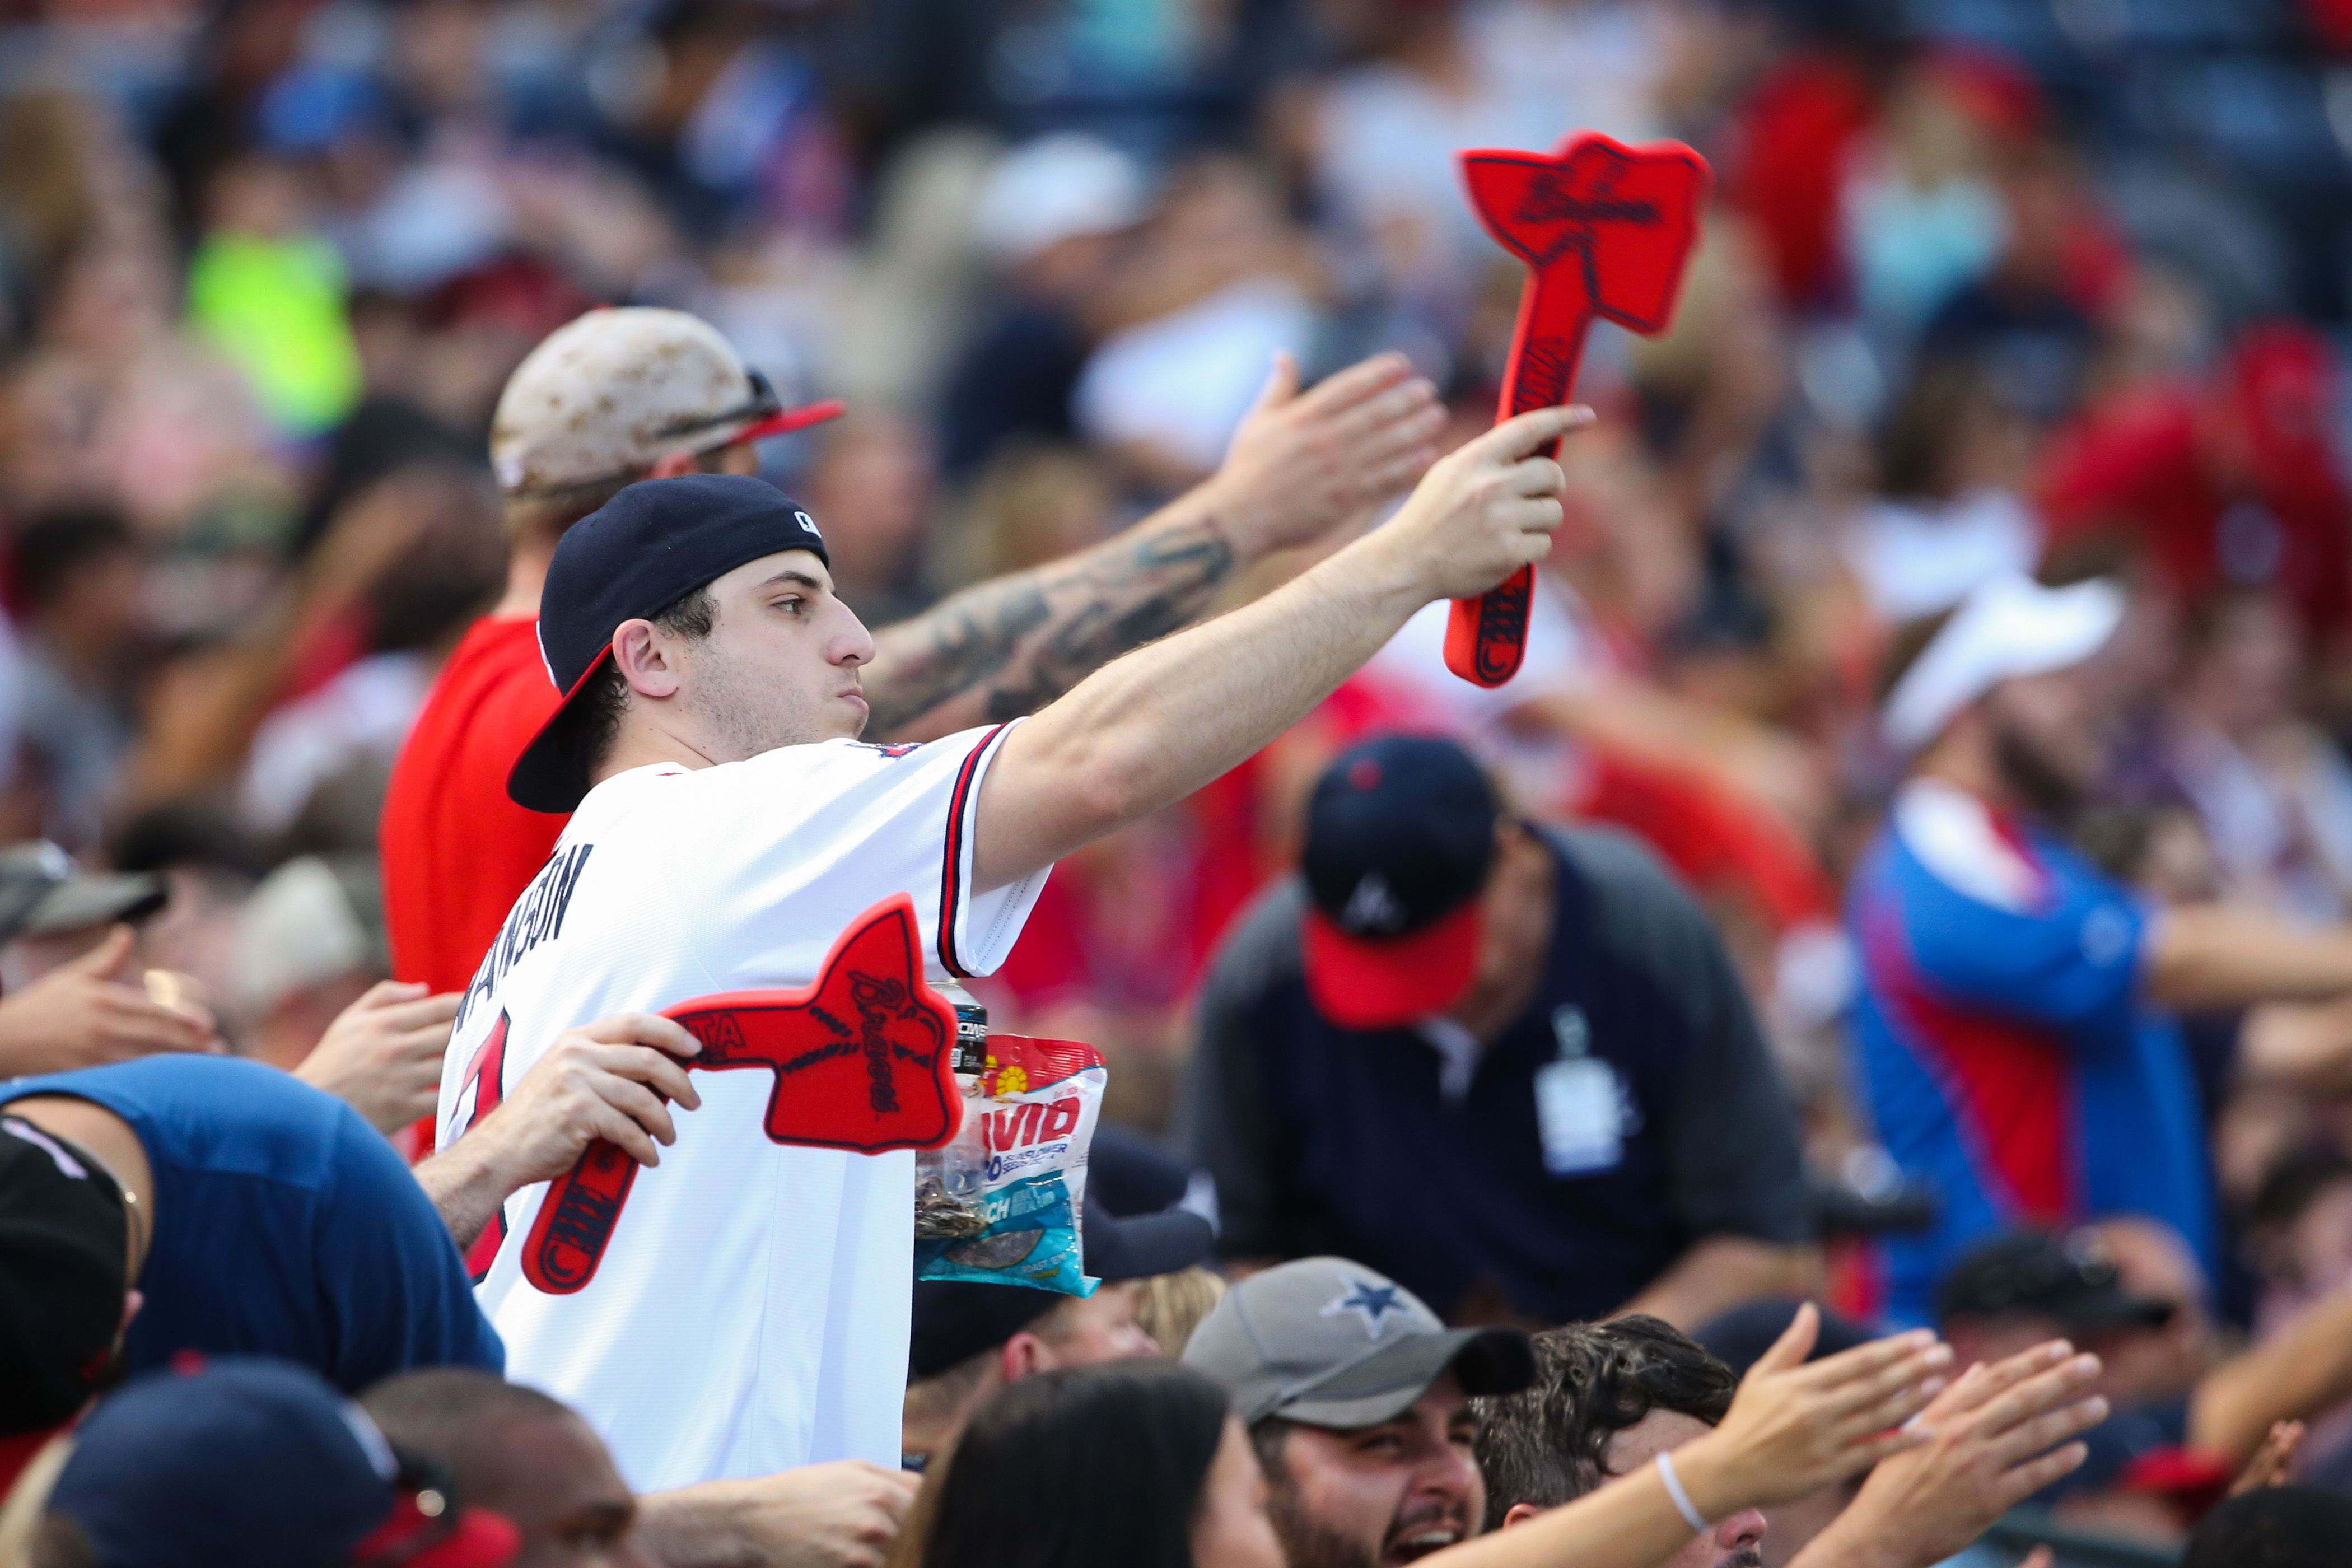 Atlanta Braves Won't Change Name, But Are Discussing the Tomahawk Chop -  Crossing Broad 